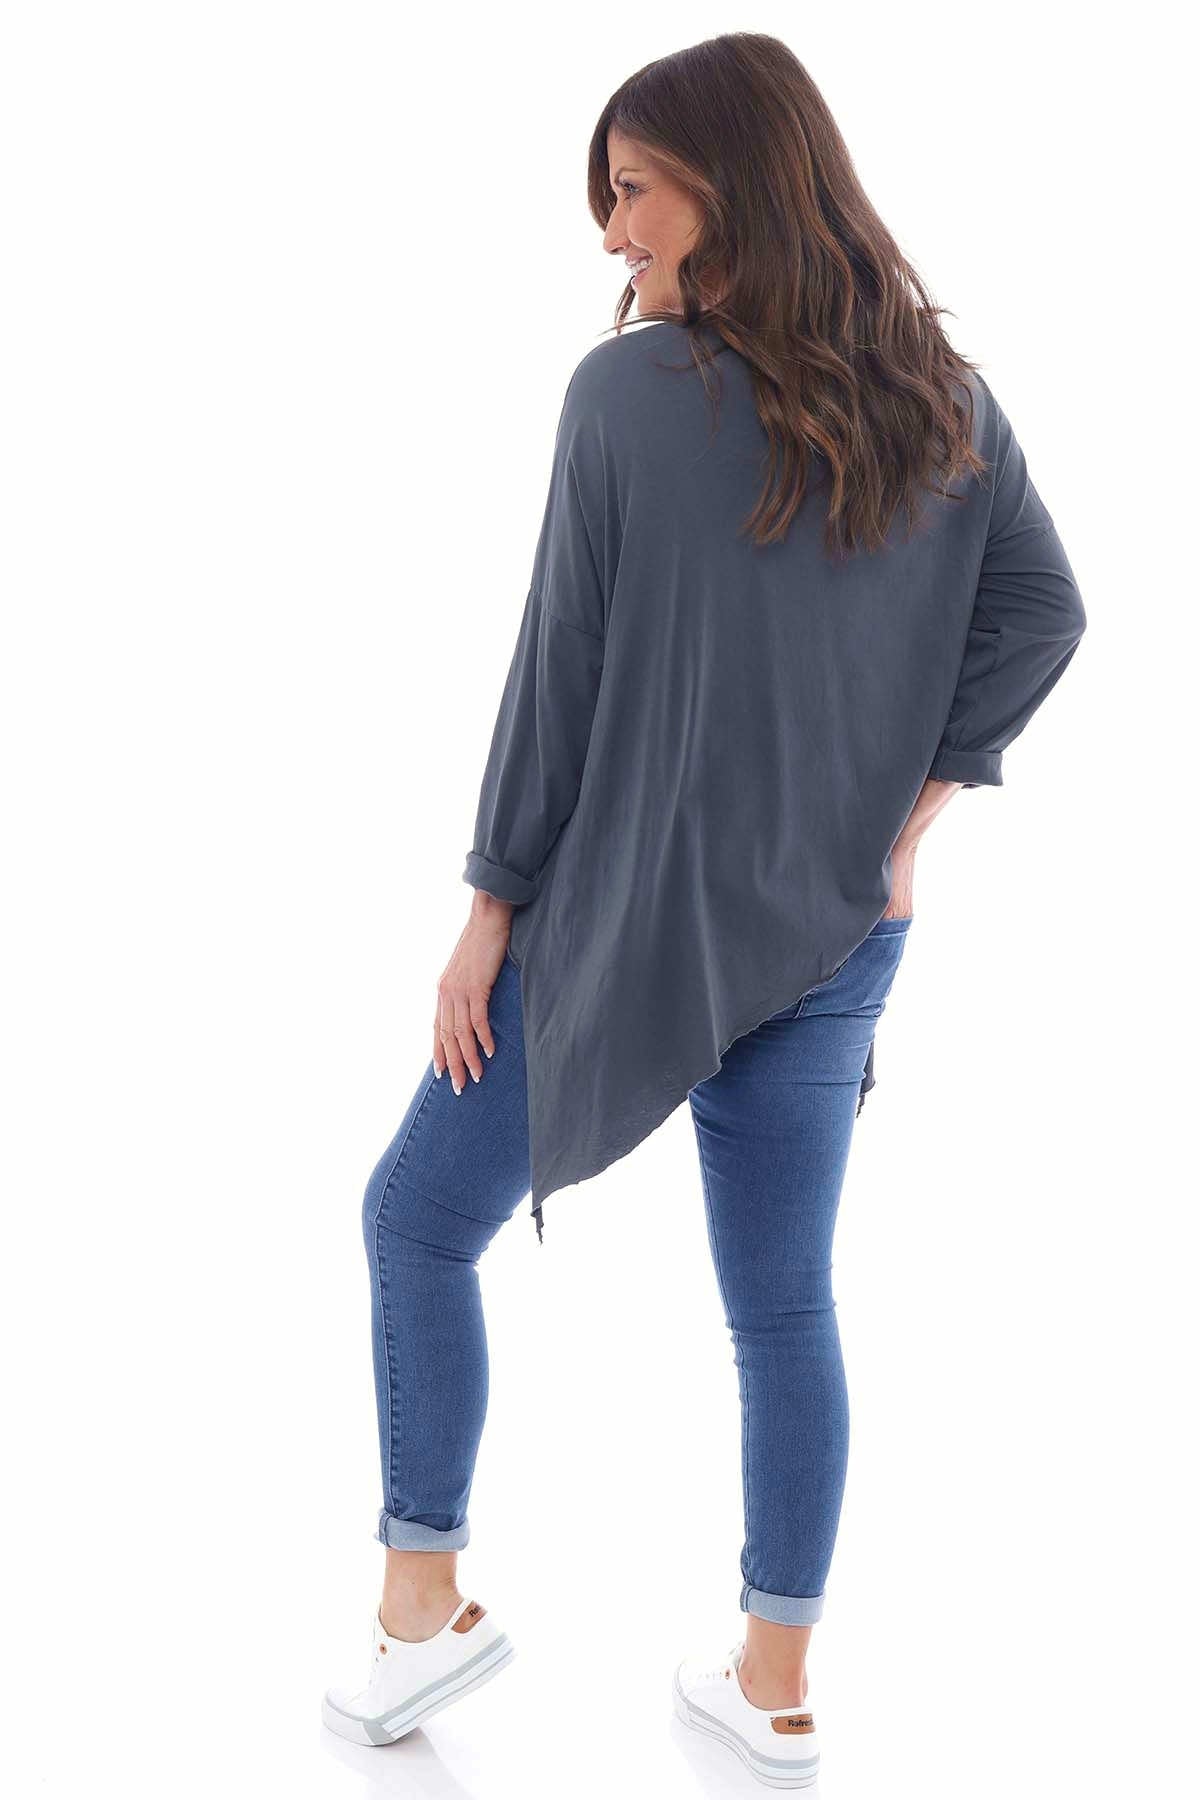 Sibil Cotton Dip Side Top Charcoal